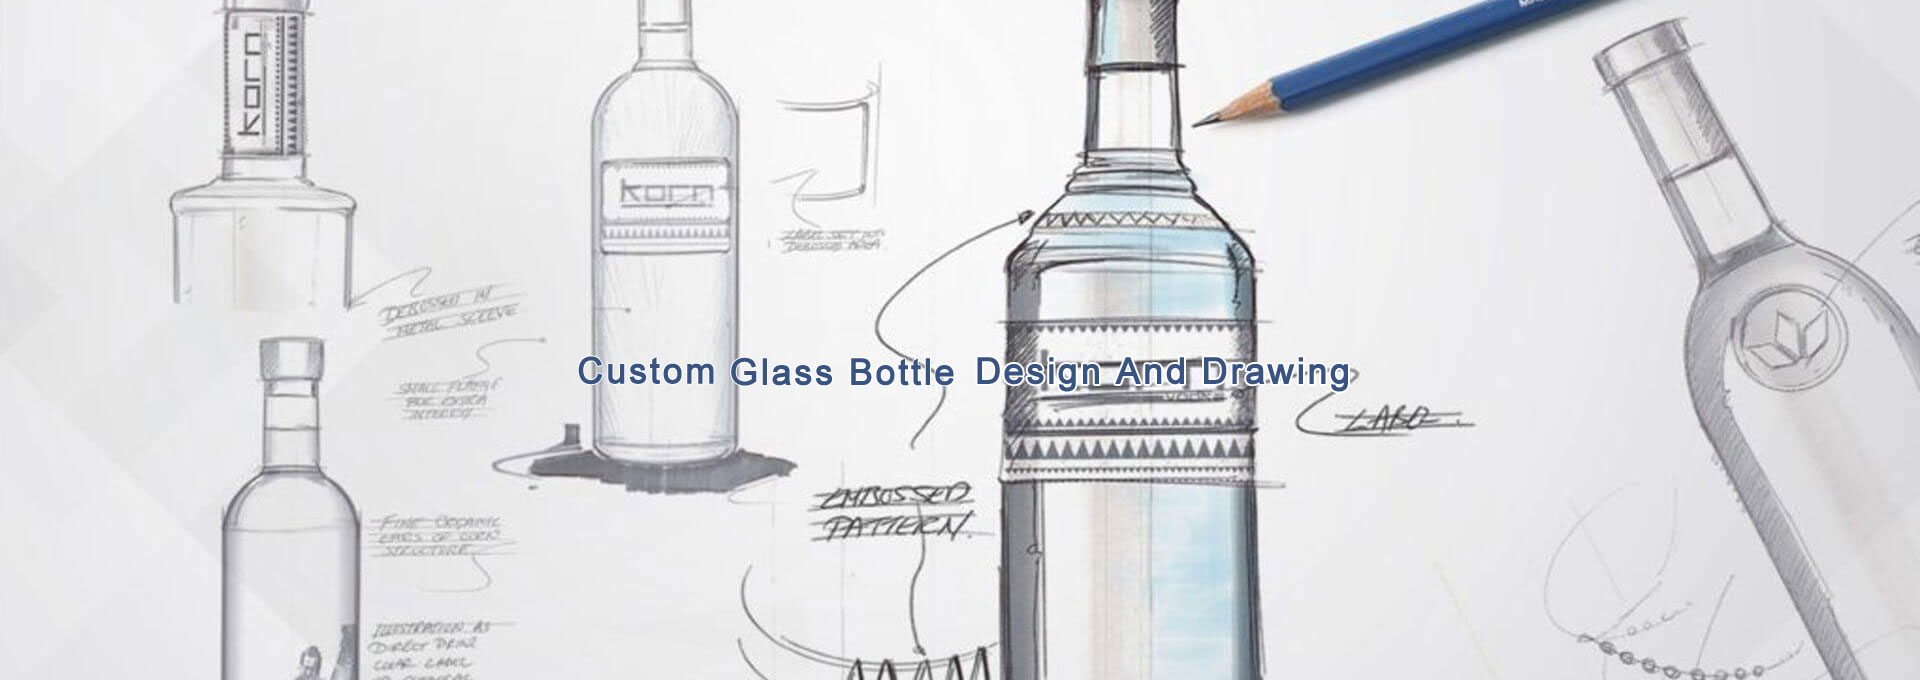 OWN YOU OWN BOTTLE : How To Make A Custom Glass Bottle Jar